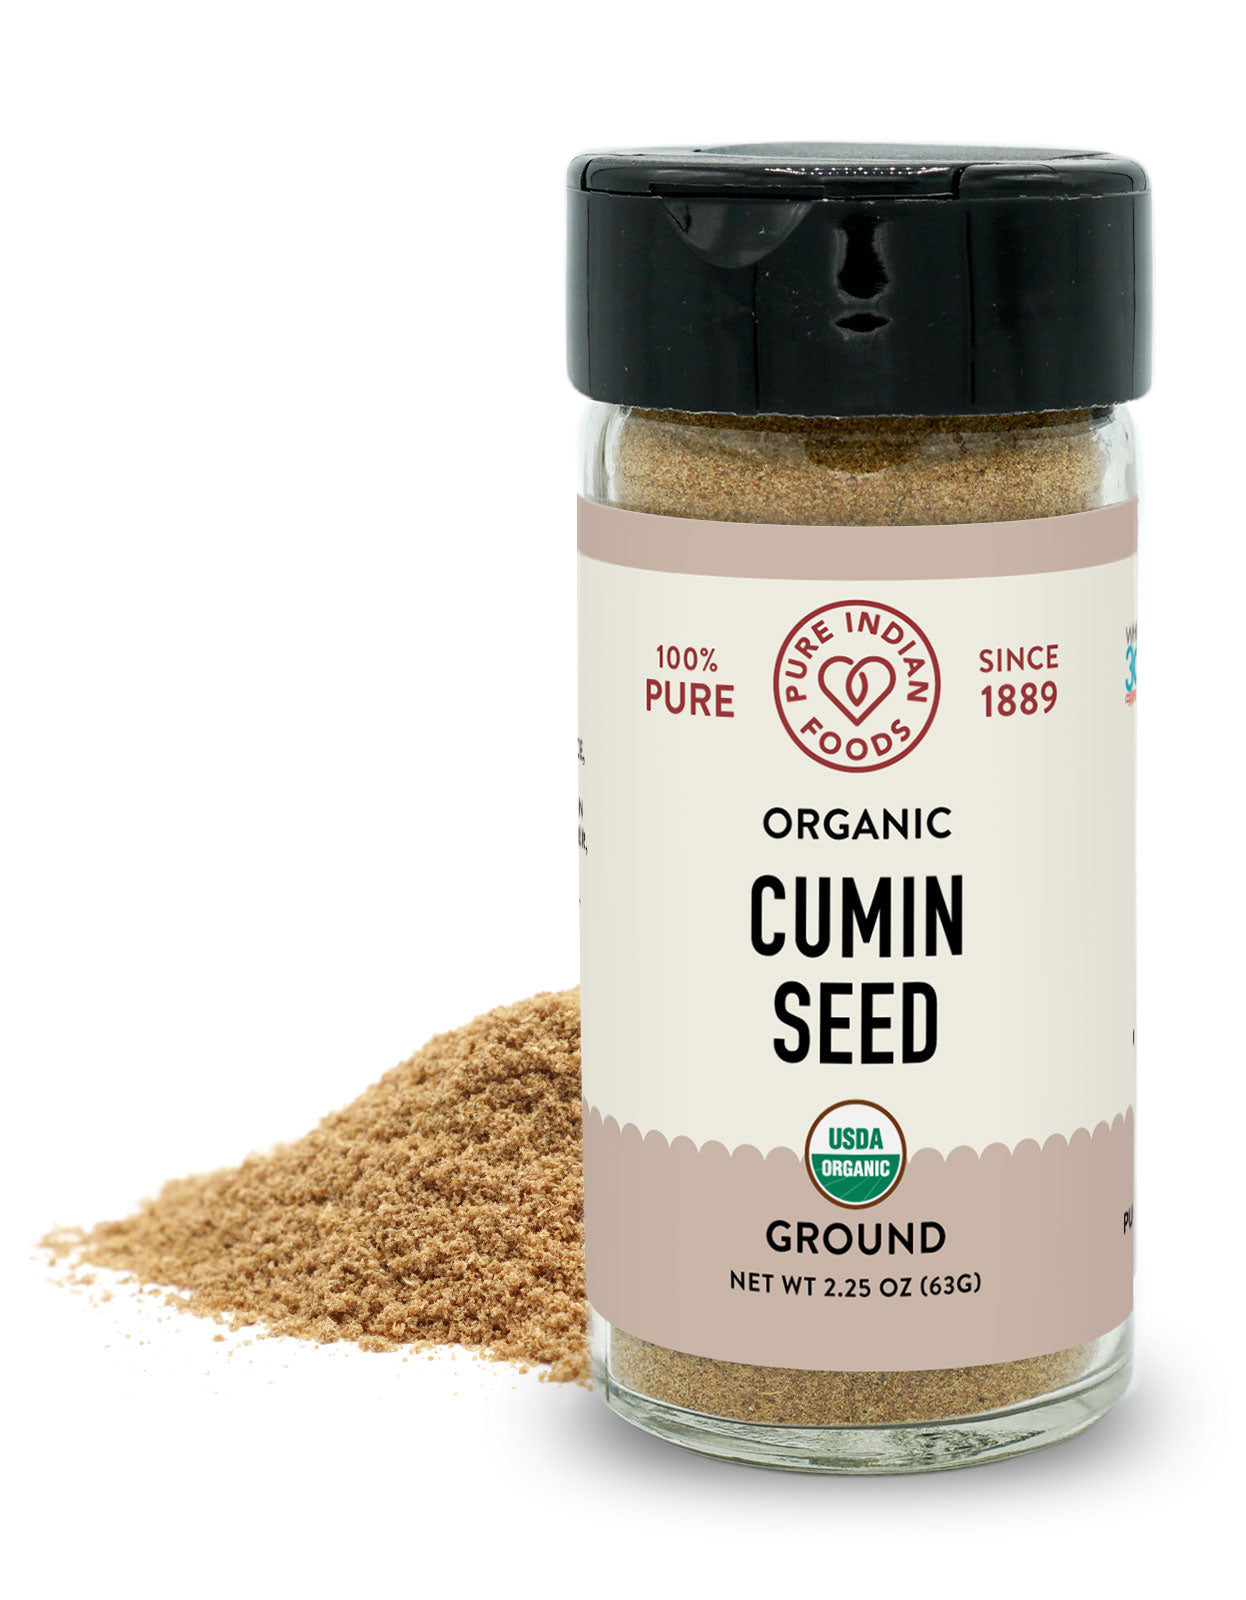 Jeera powder from Pure Indian Foods, also known as ground organic white cumin seed.